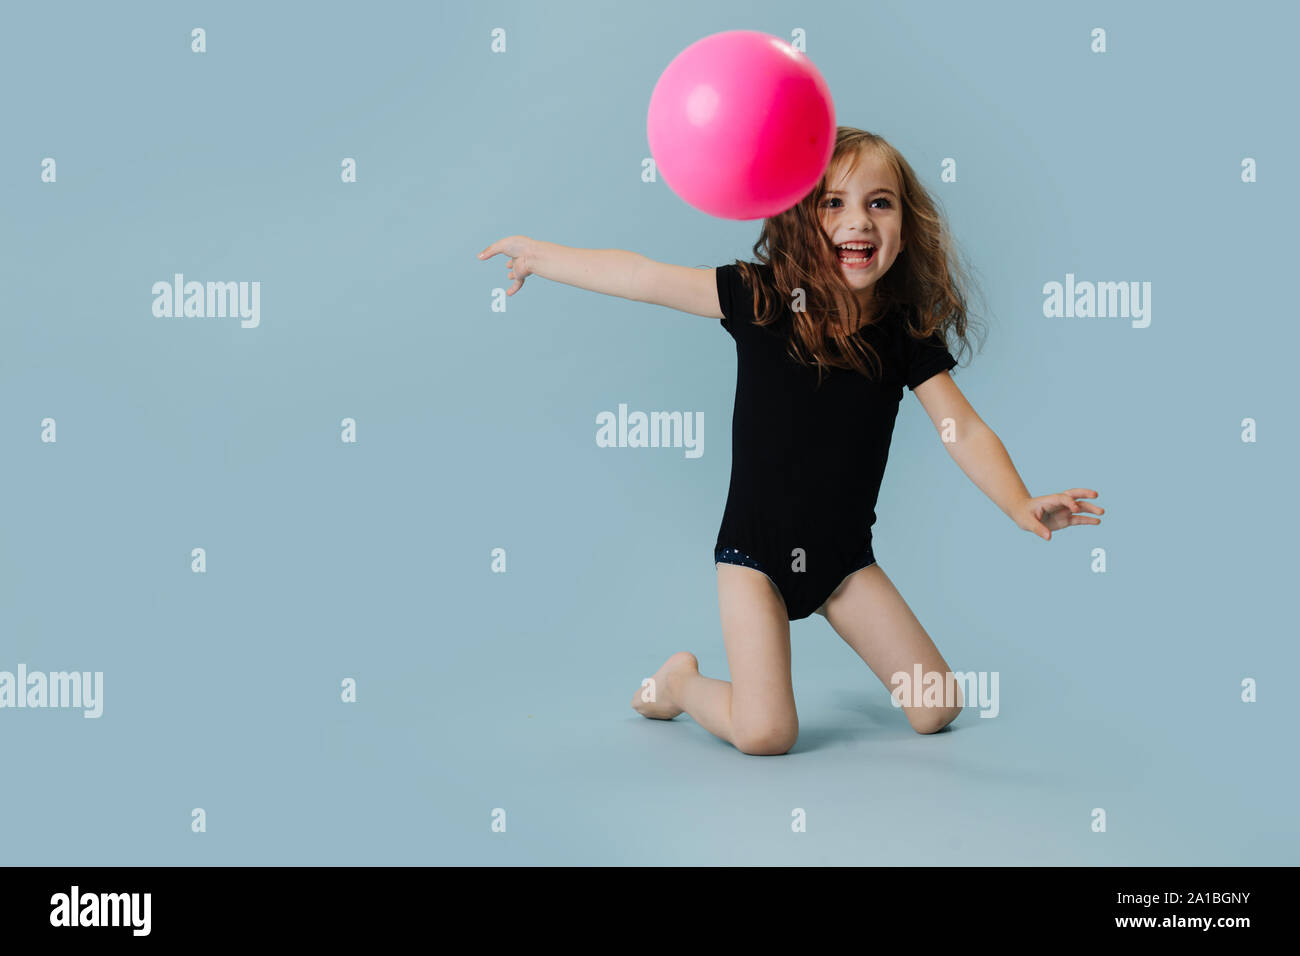 Little girl in a black leotard with pink gymnastic ball over blue background Stock Photo